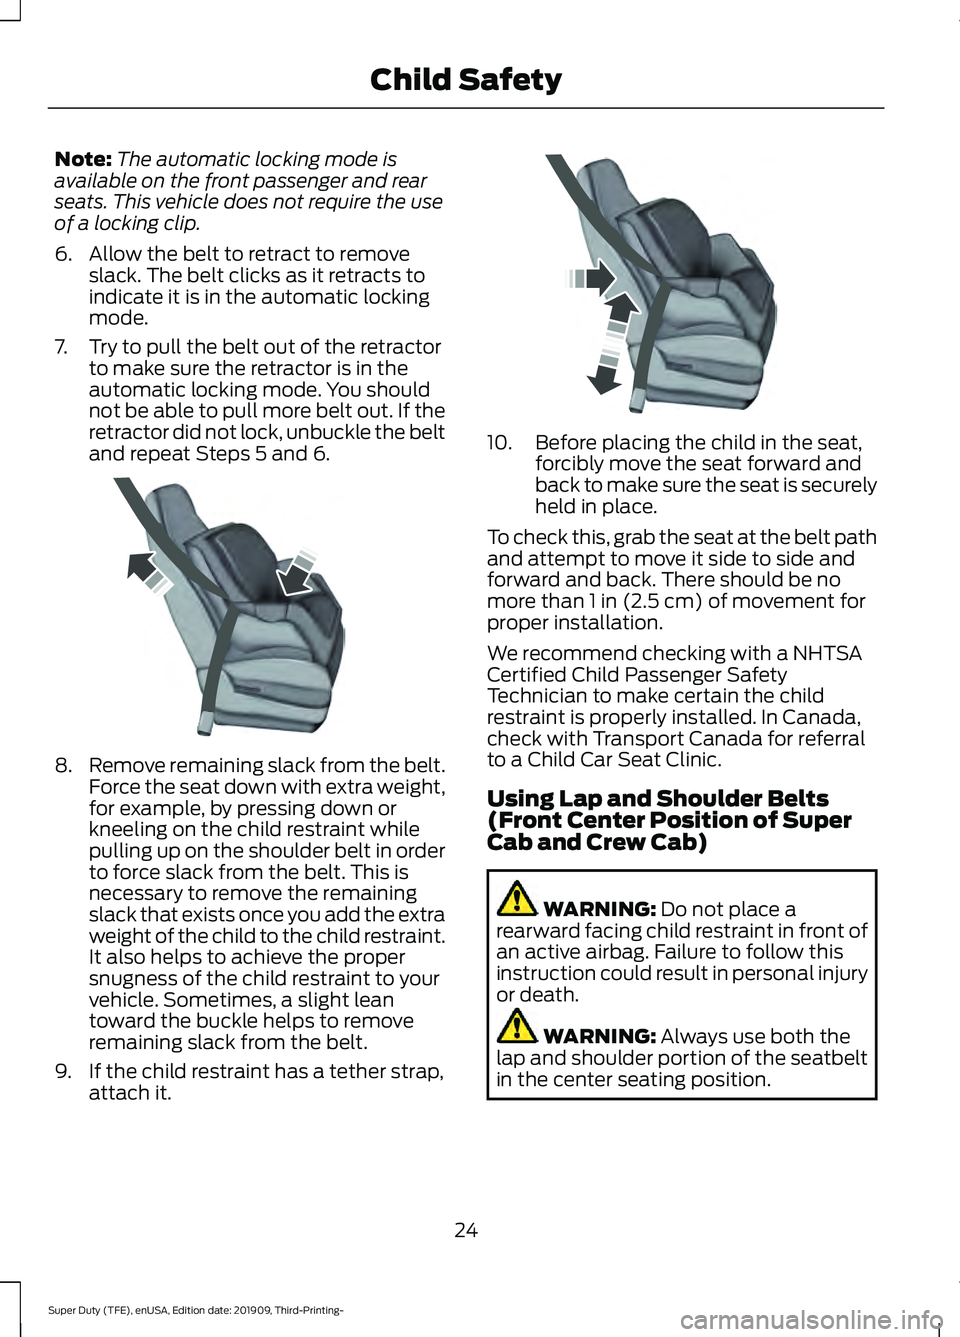 FORD F-550 2020  Owners Manual Note:
The automatic locking mode is
available on the front passenger and rear
seats. This vehicle does not require the use
of a locking clip.
6. Allow the belt to retract to remove slack. The belt cli